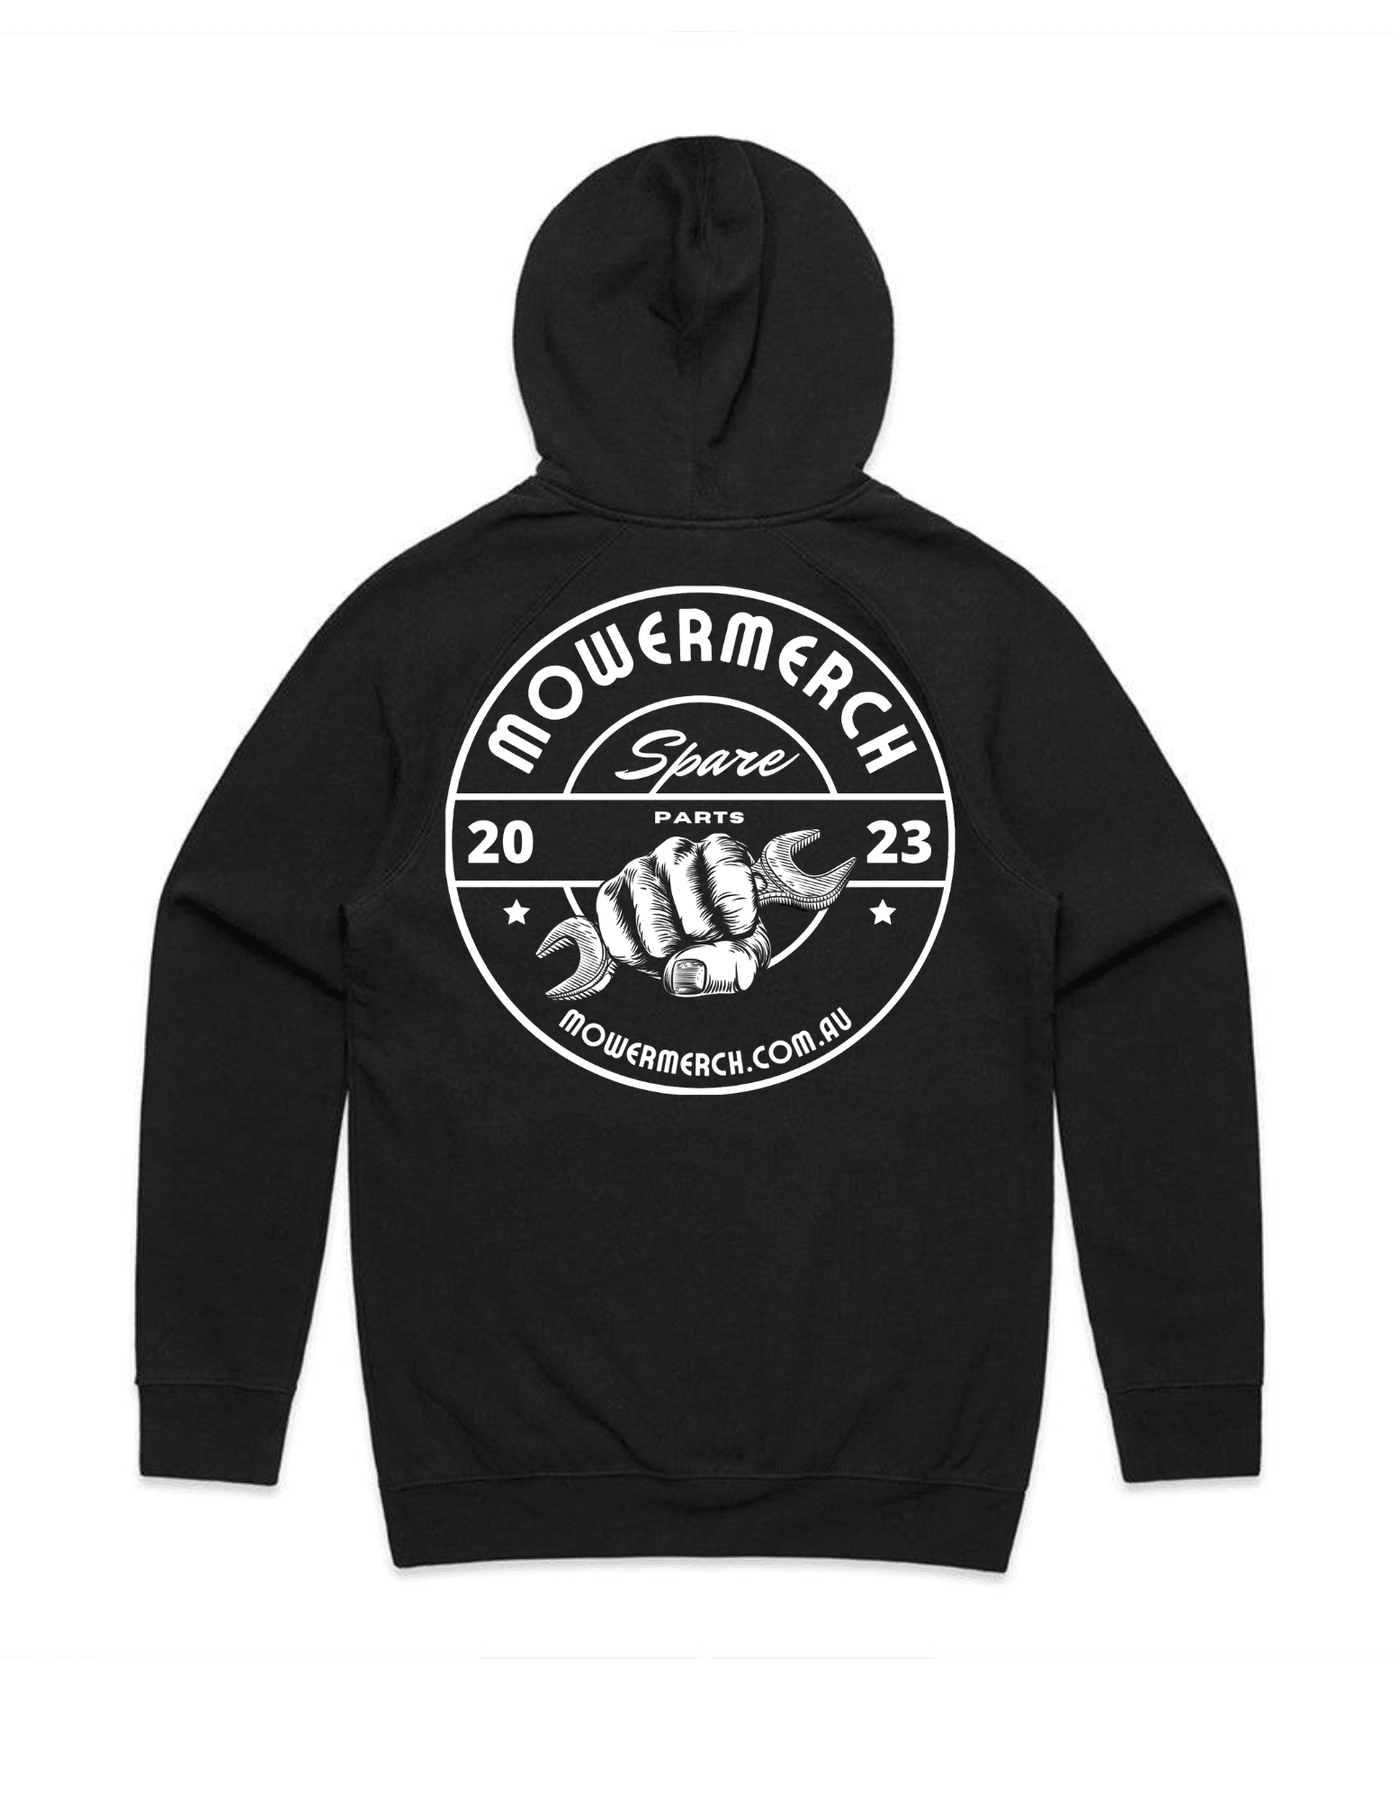 Mowermerch Unisex Hoodie - Mowermerch More spare parts for all your power equipment needs available. From mower spare parts to all other power equipment spare parts we have them all. If your gardening equipment needs new spare parts, check us out!